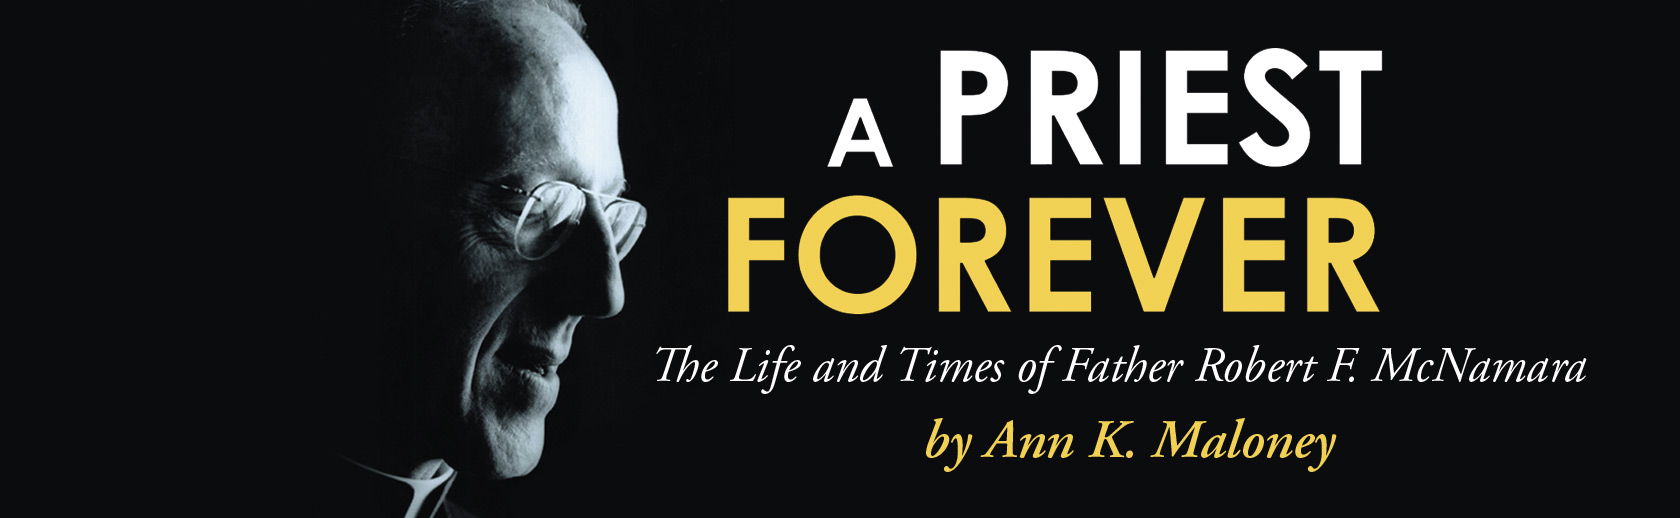 A Priest Forever: The Life and Times of Father Robert F. McNamara